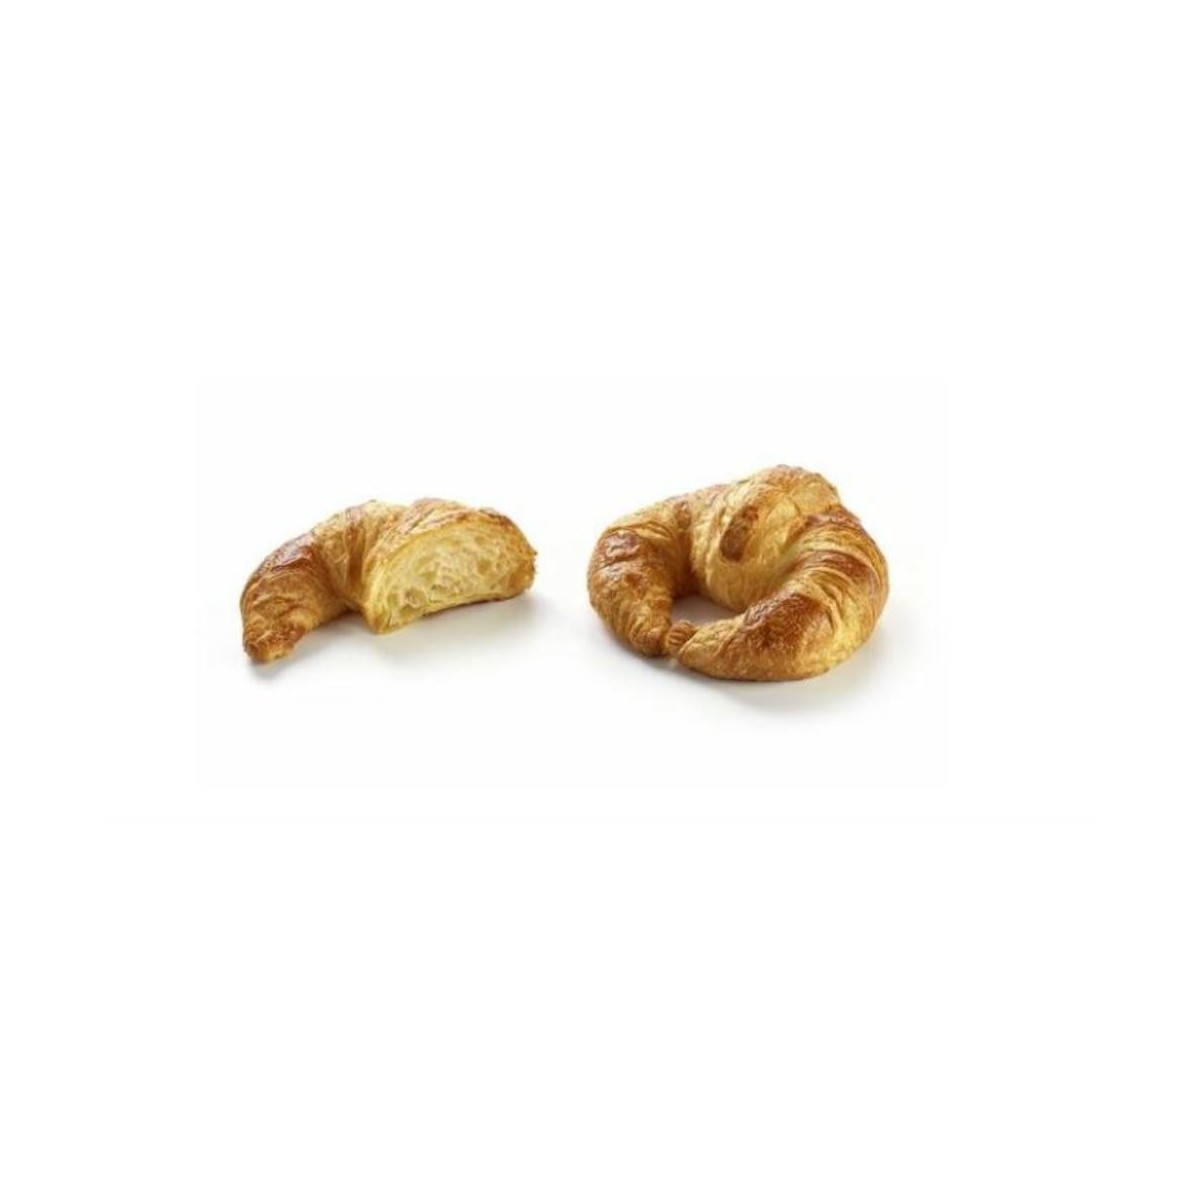 DAUPHINE 5001211 CROISSANT COURBE  PAC 36X100GR